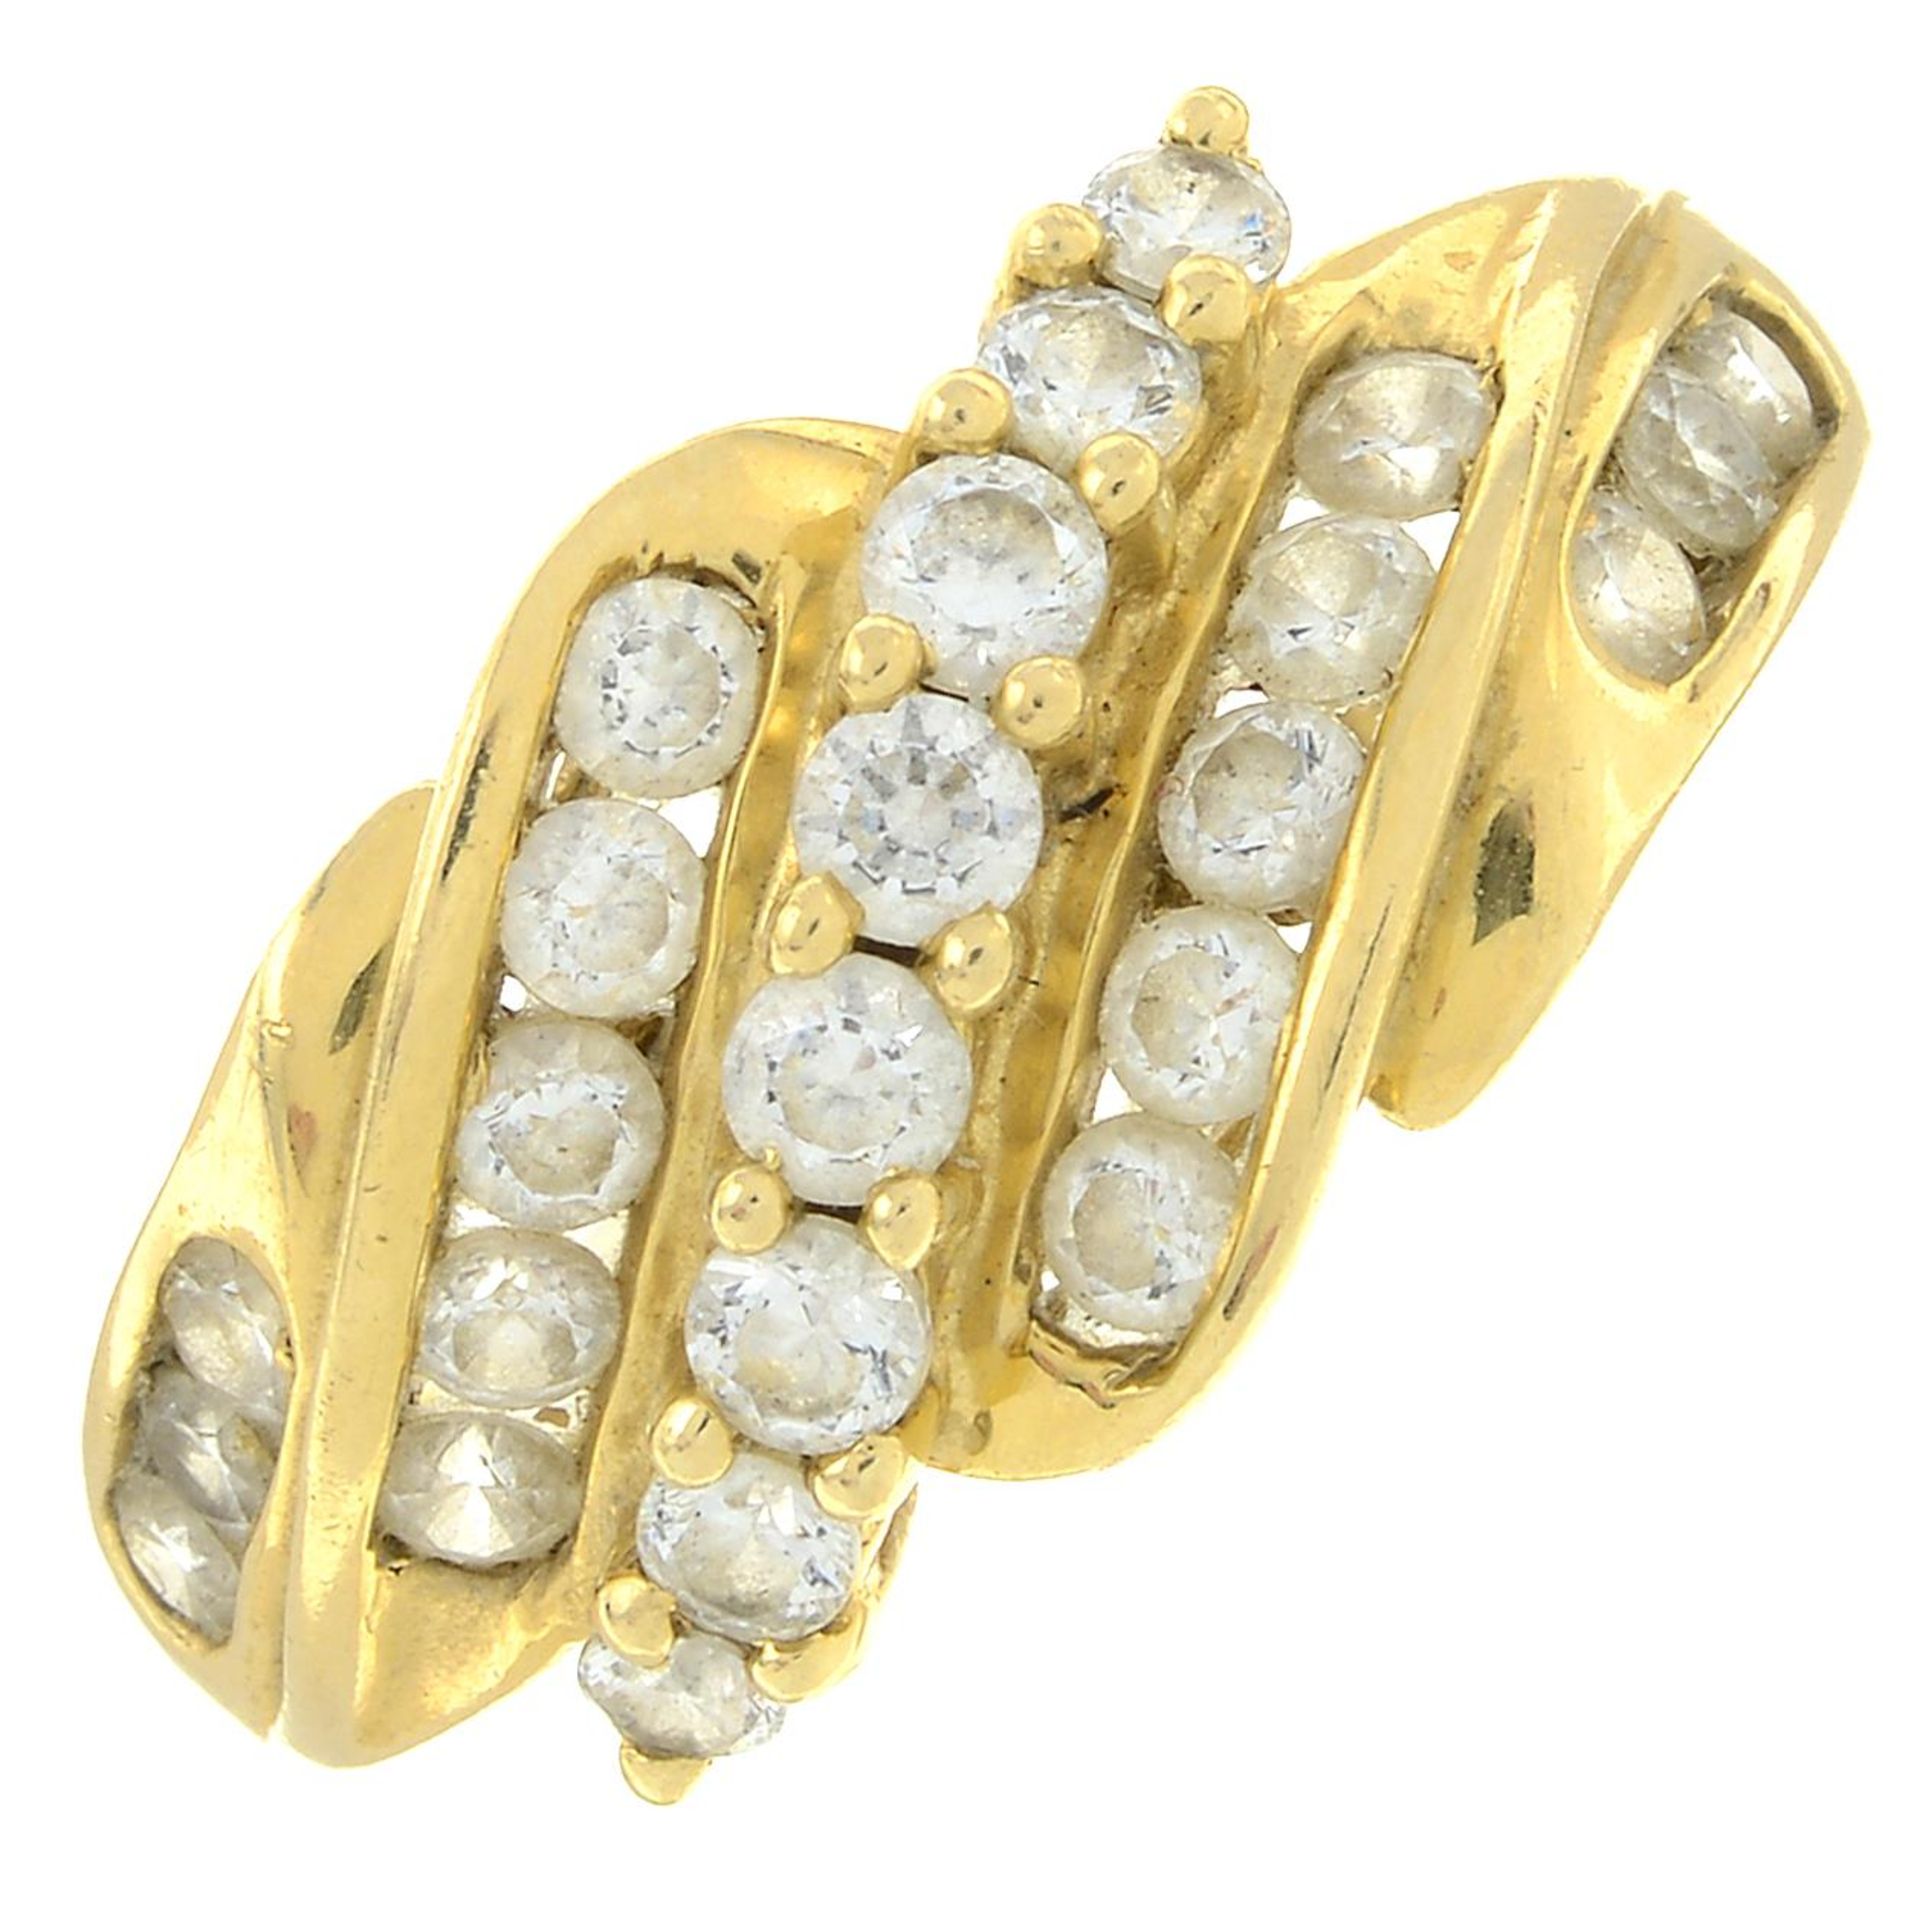 A 14ct gold cubic zirconia dress ring.Hallmarks for Birmingham, 2002.Ring size R.